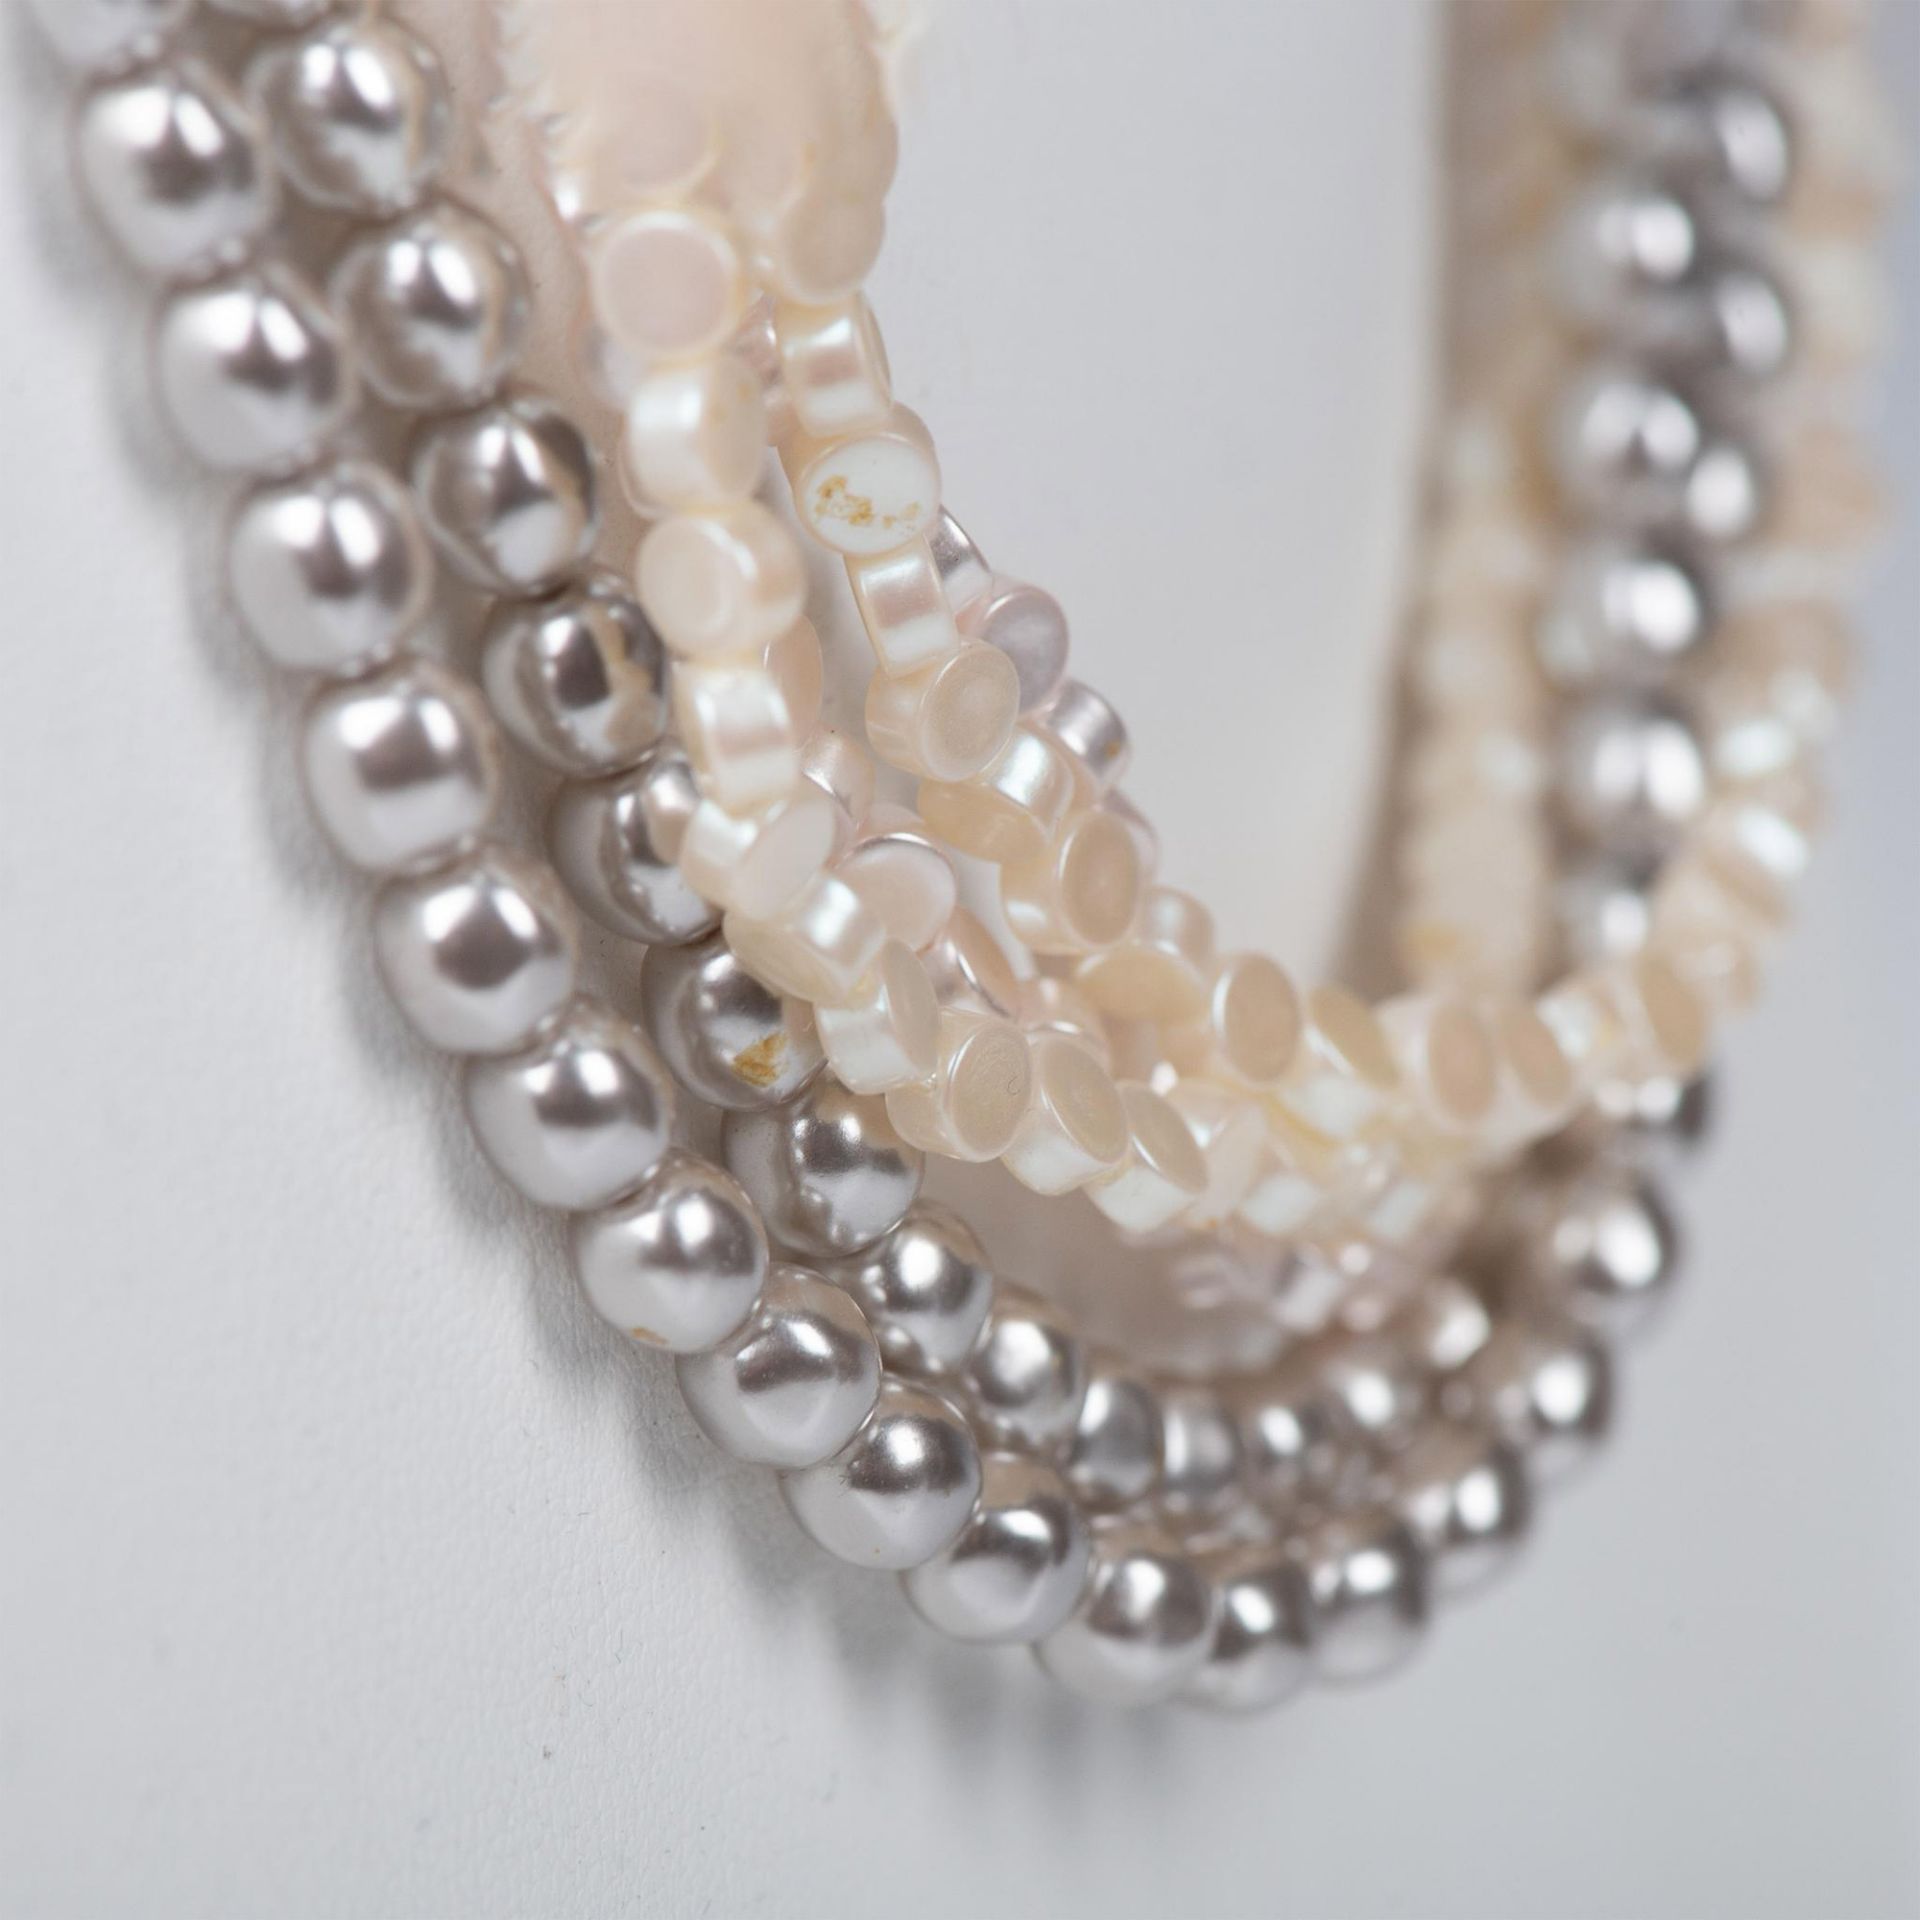 Monet Six-Strand Two-Tone Faux Pearl Necklace - Image 2 of 3